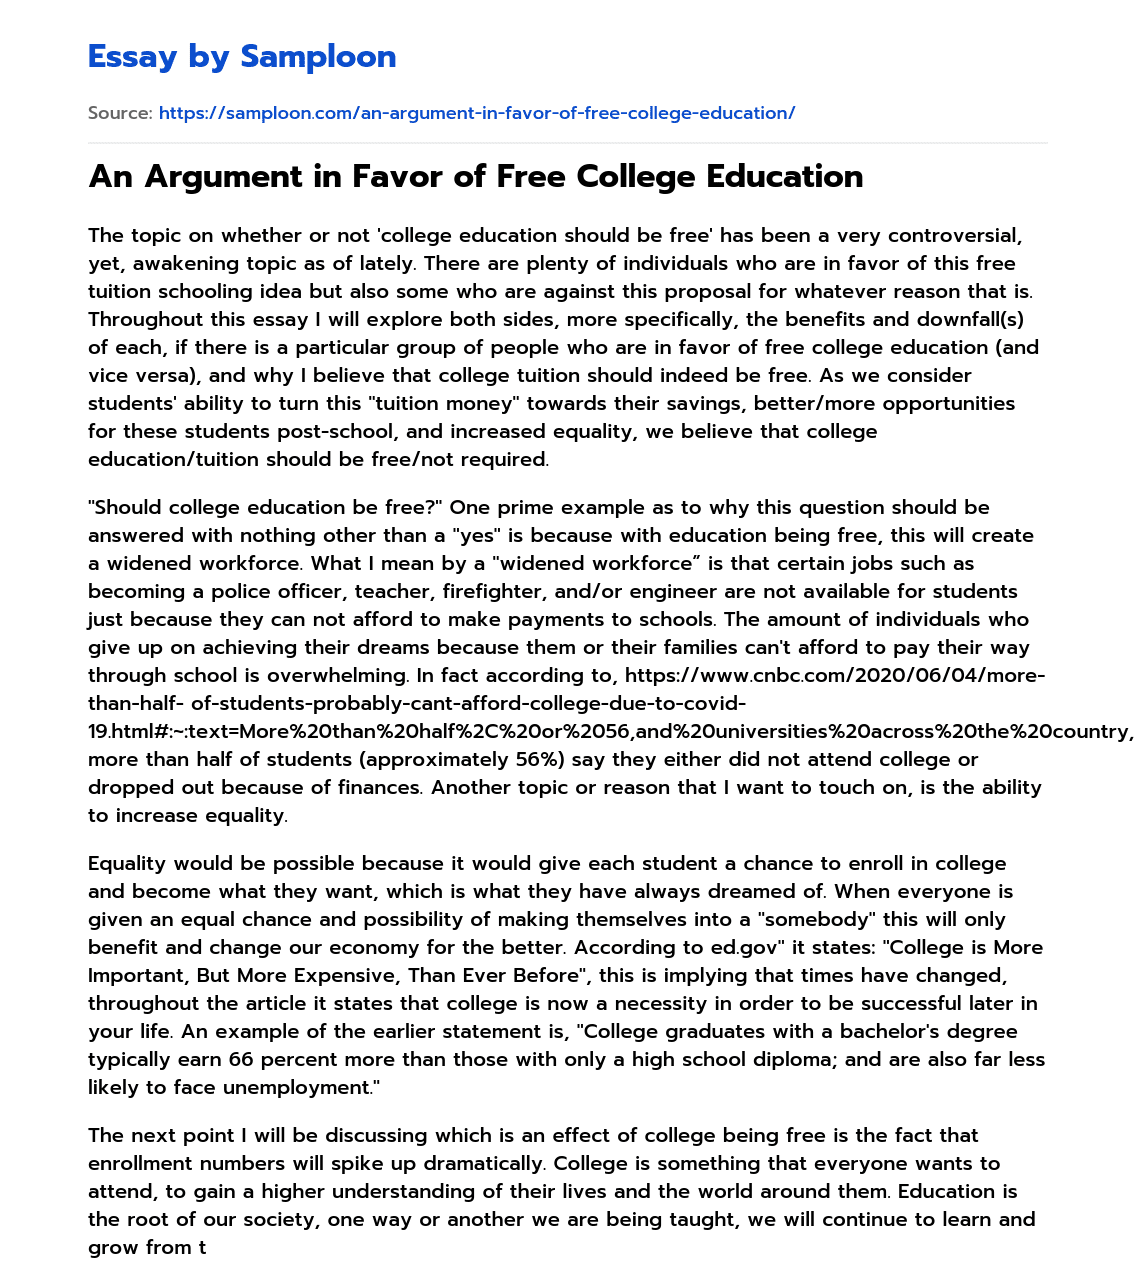 An Argument in Favor of Free College Education essay